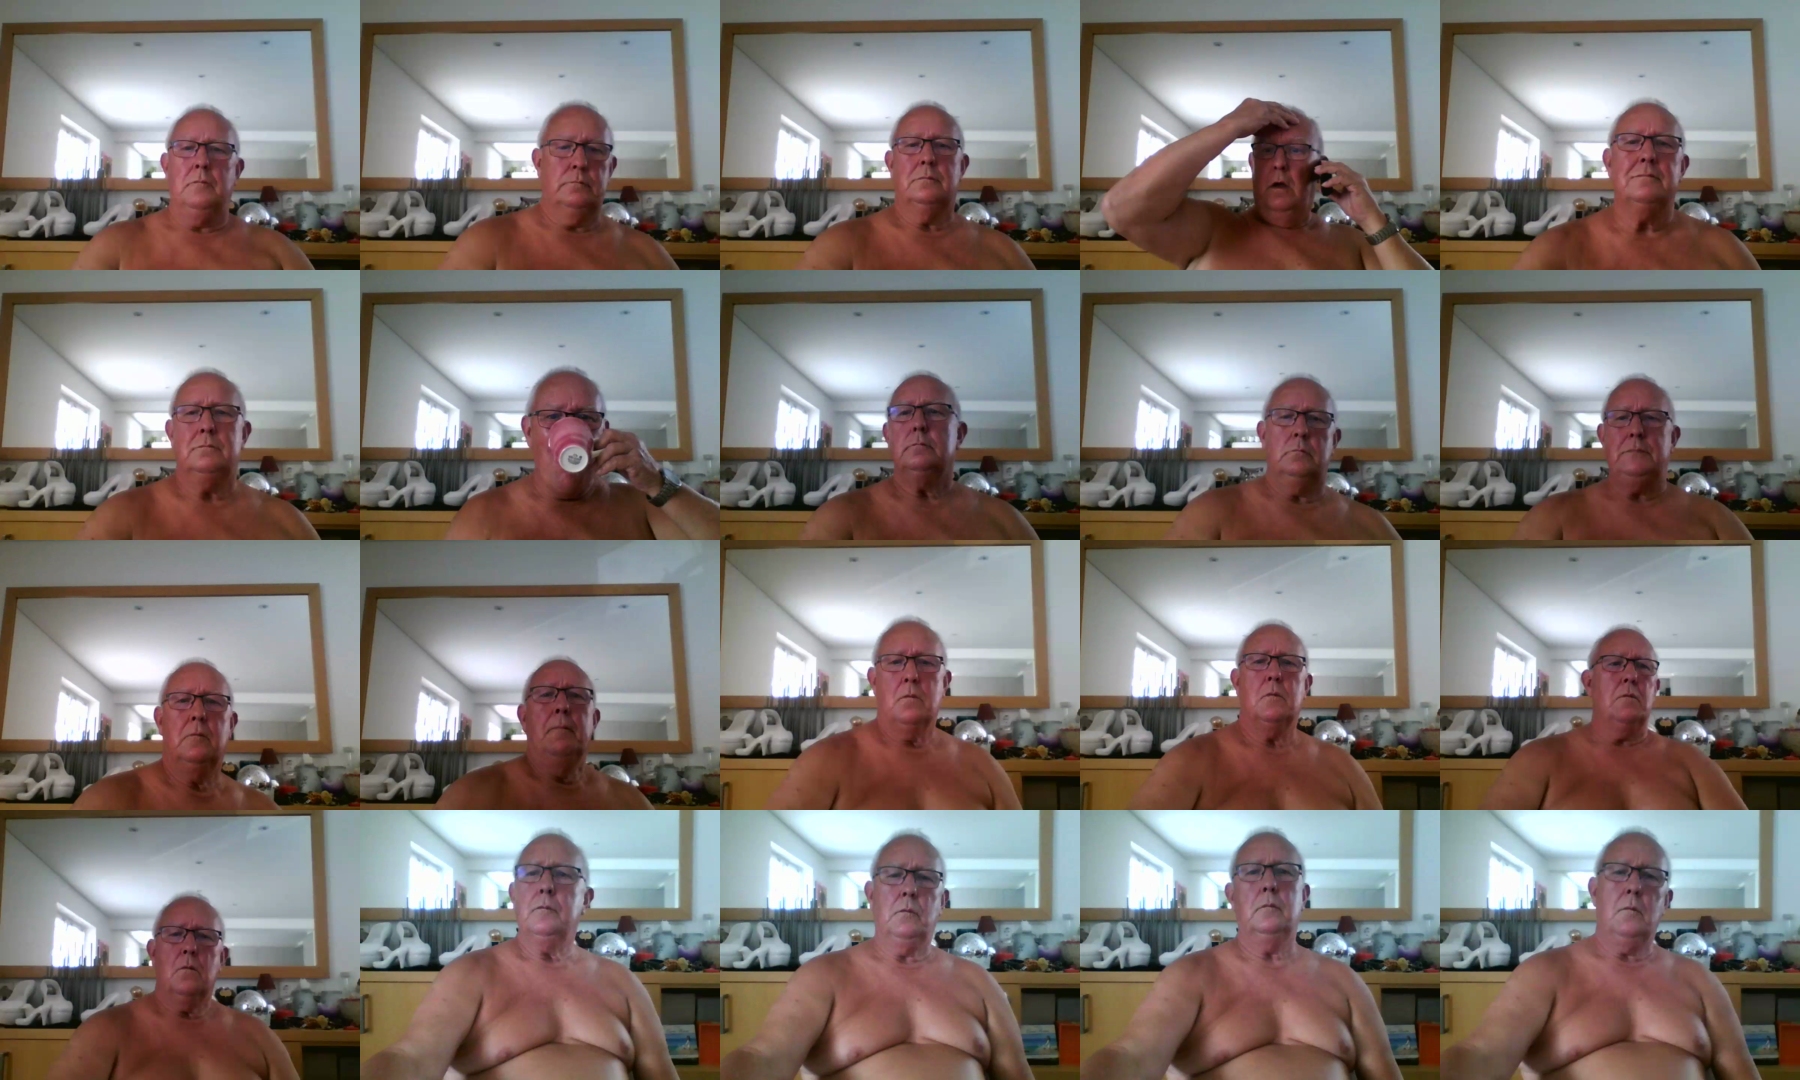 klaus4457  05-07-2021 Recorded Video Topless